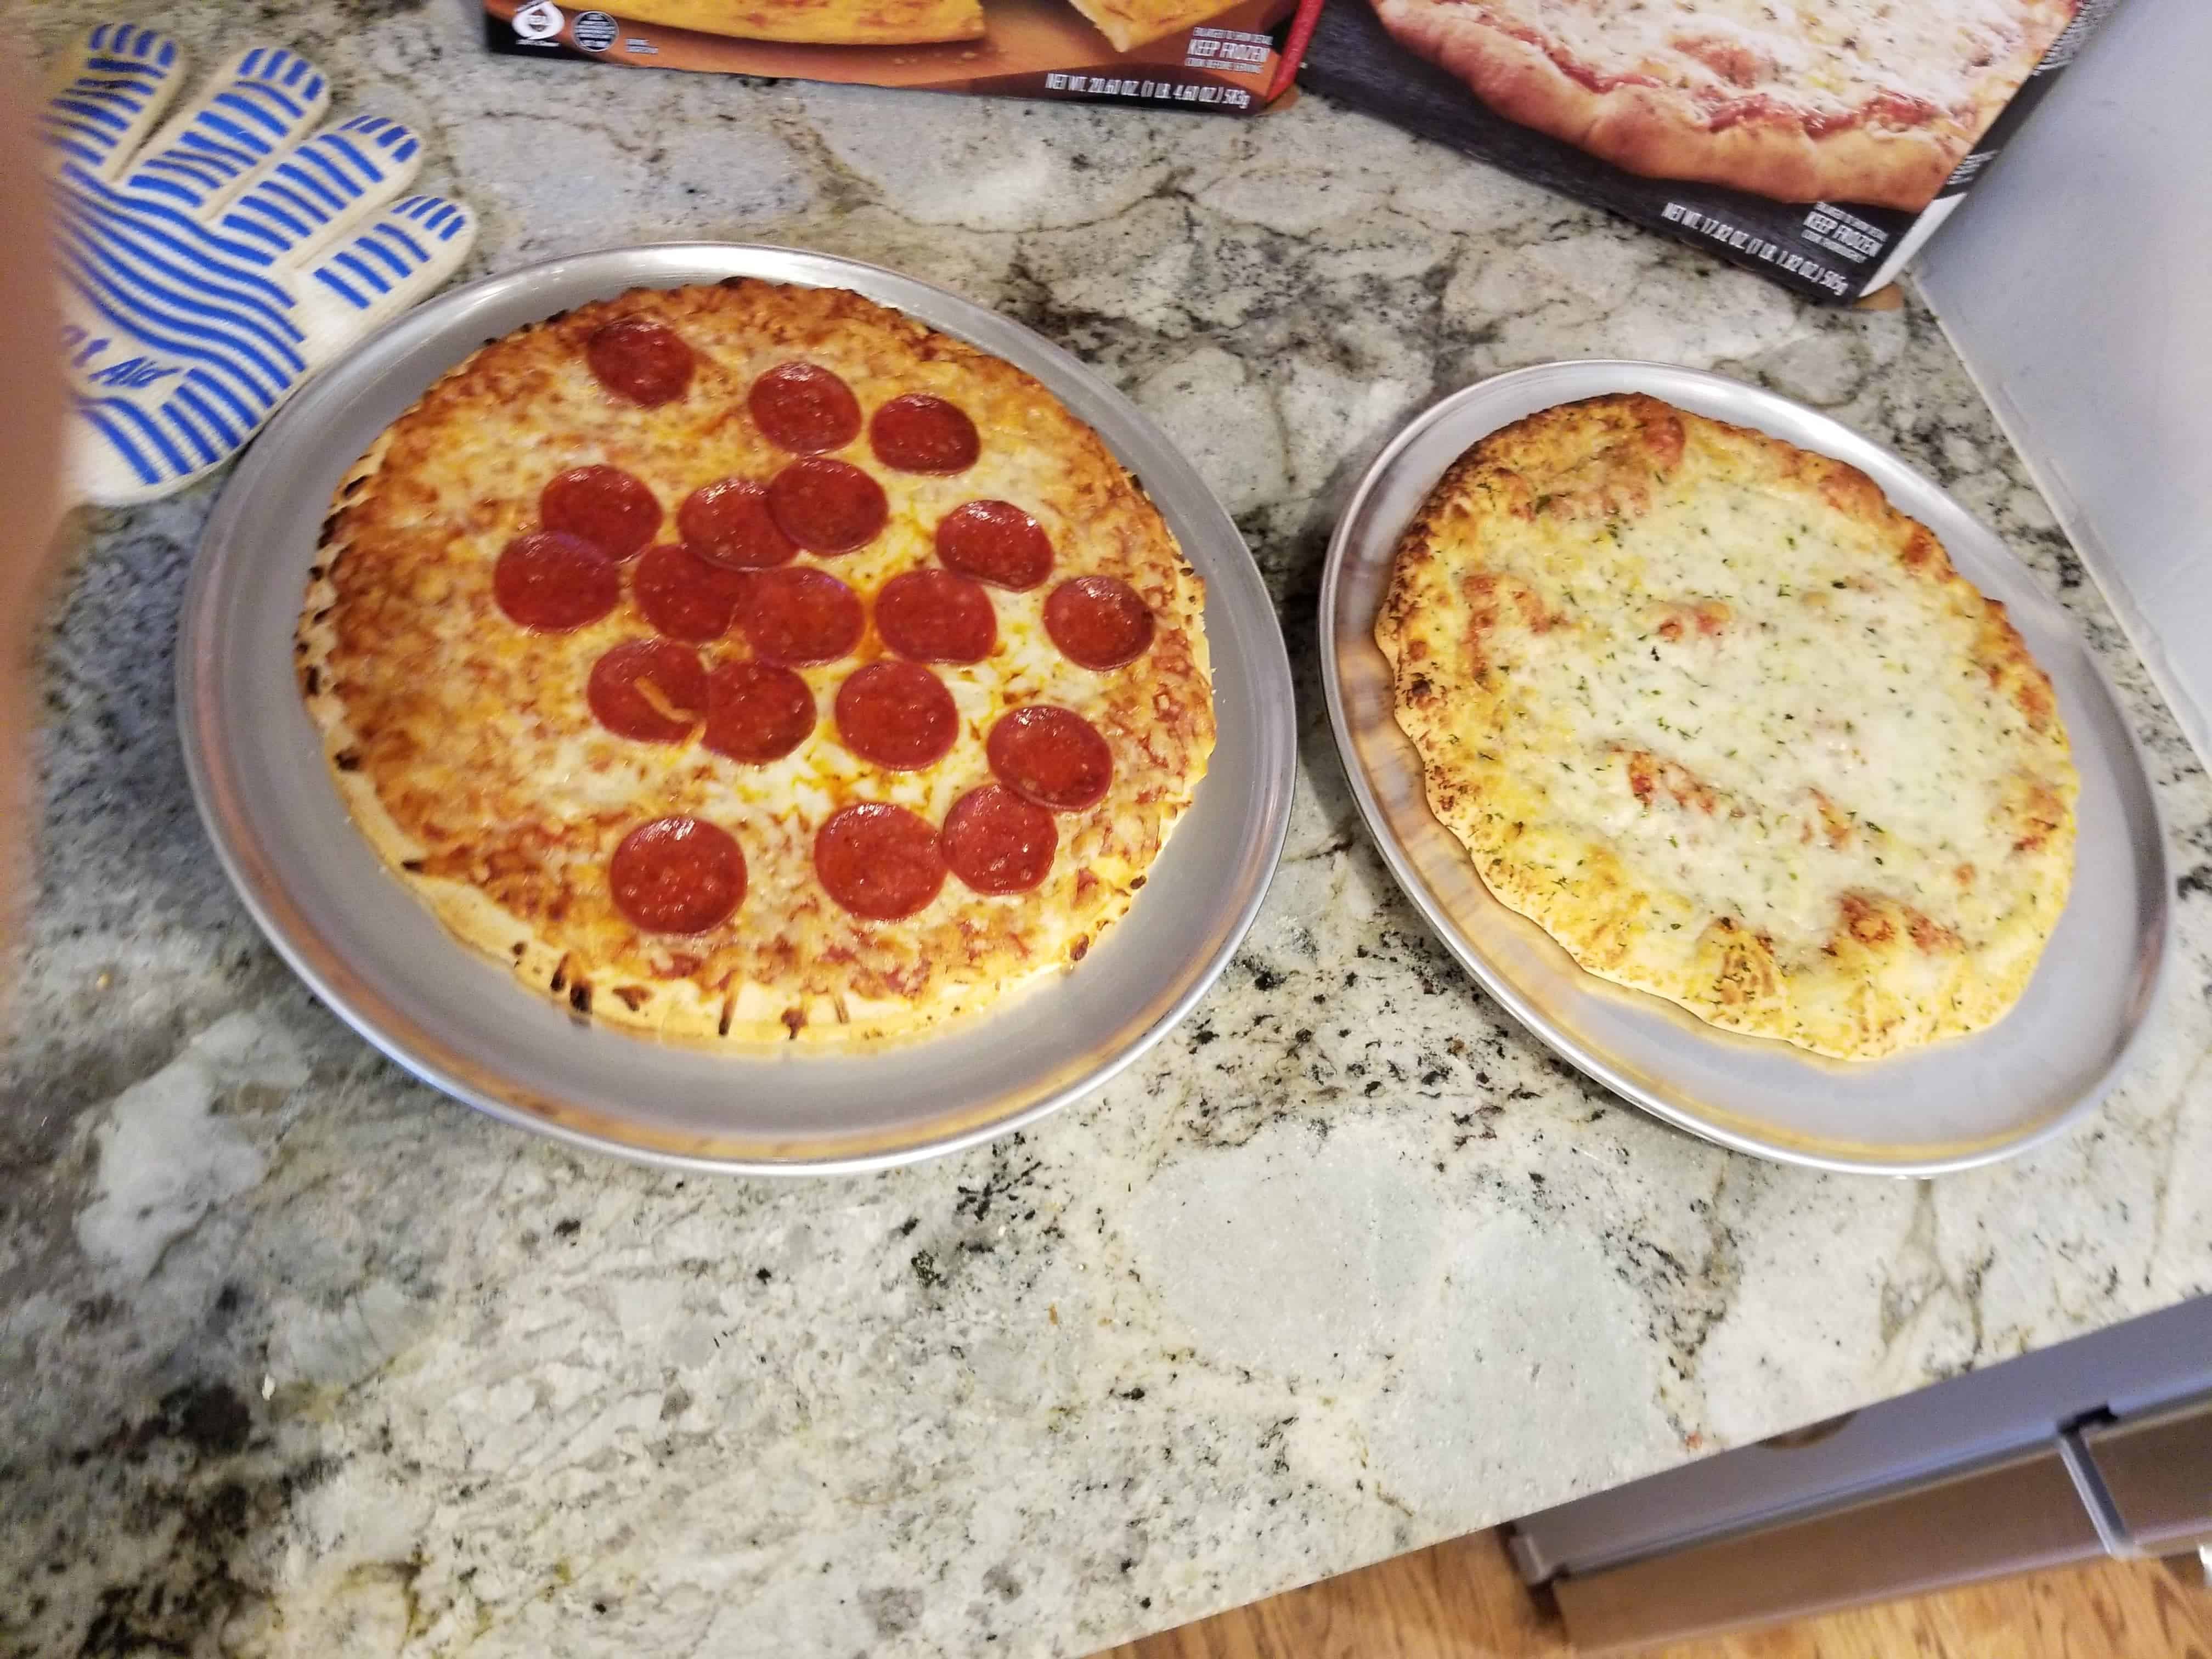 With so many flavors, pizza is easily a family favorite and makes everyone happy. Check out Red Baron pizza and more tips for reducing summer chaos at Made In A Pinch-min